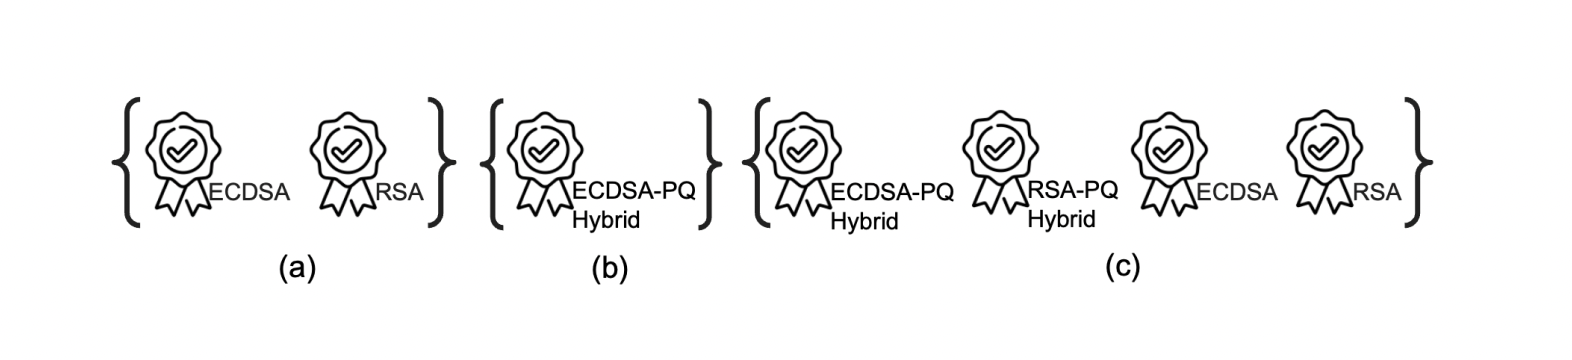 (Future) Instantiations for the web applications&rsquo; list of supported signature schemes; a) current list with choices between ECDSA and RSA, b) quantum-resistant combination of traditional and post-quantum hybrid signatures as the only option, c)  hybrid signature in addition to traditional schemes to offer quantum-resistance while being backwards-compatible.